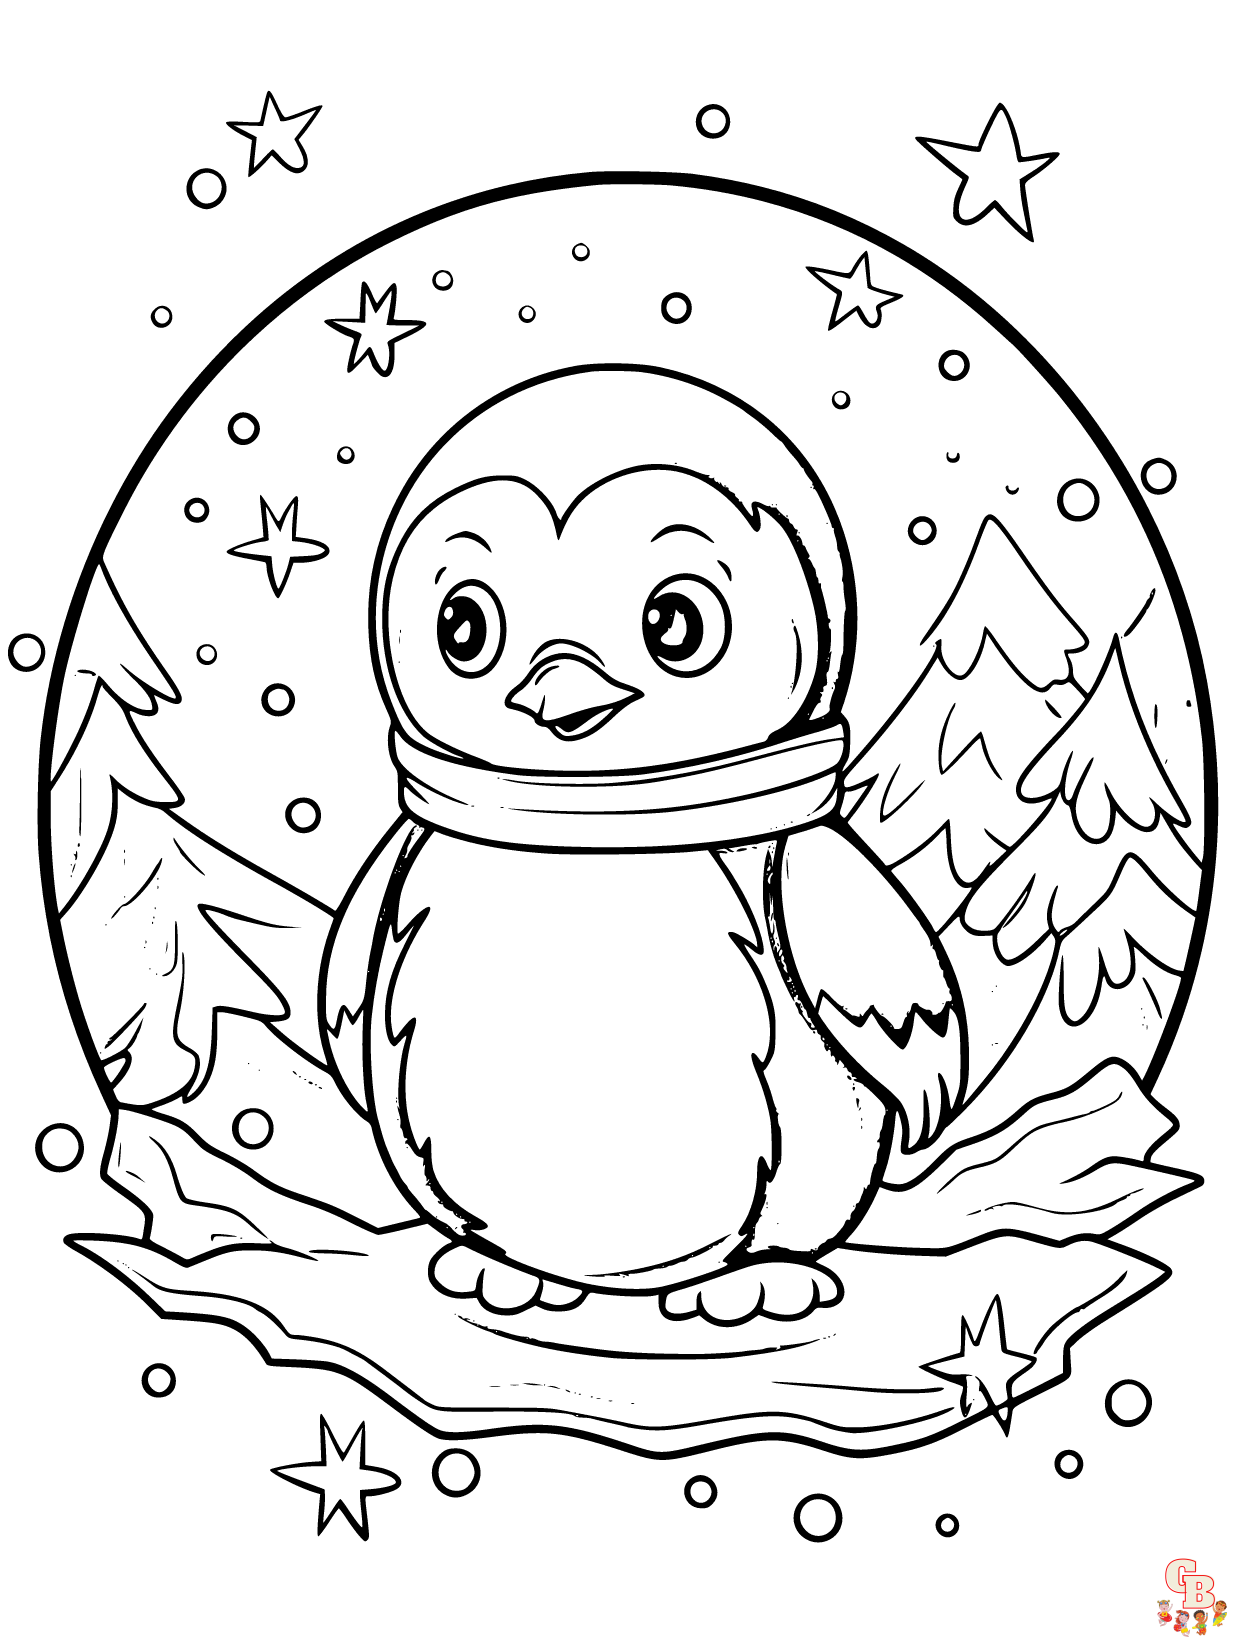 Penguin coloring pages printable free fun for kids